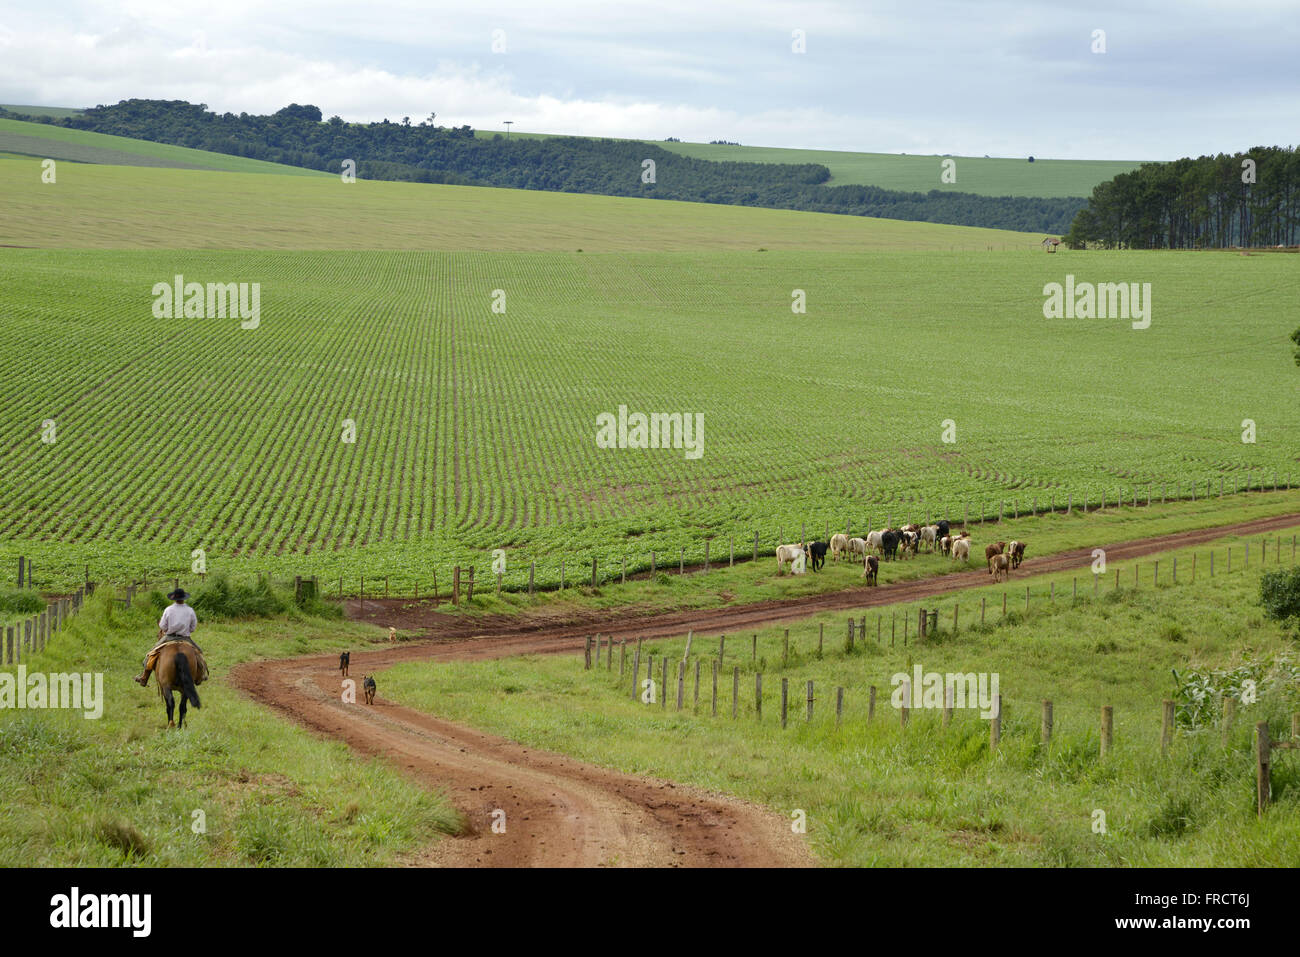 Knight playing mixed breed cattle on a dirt road in the countryside Stock Photo